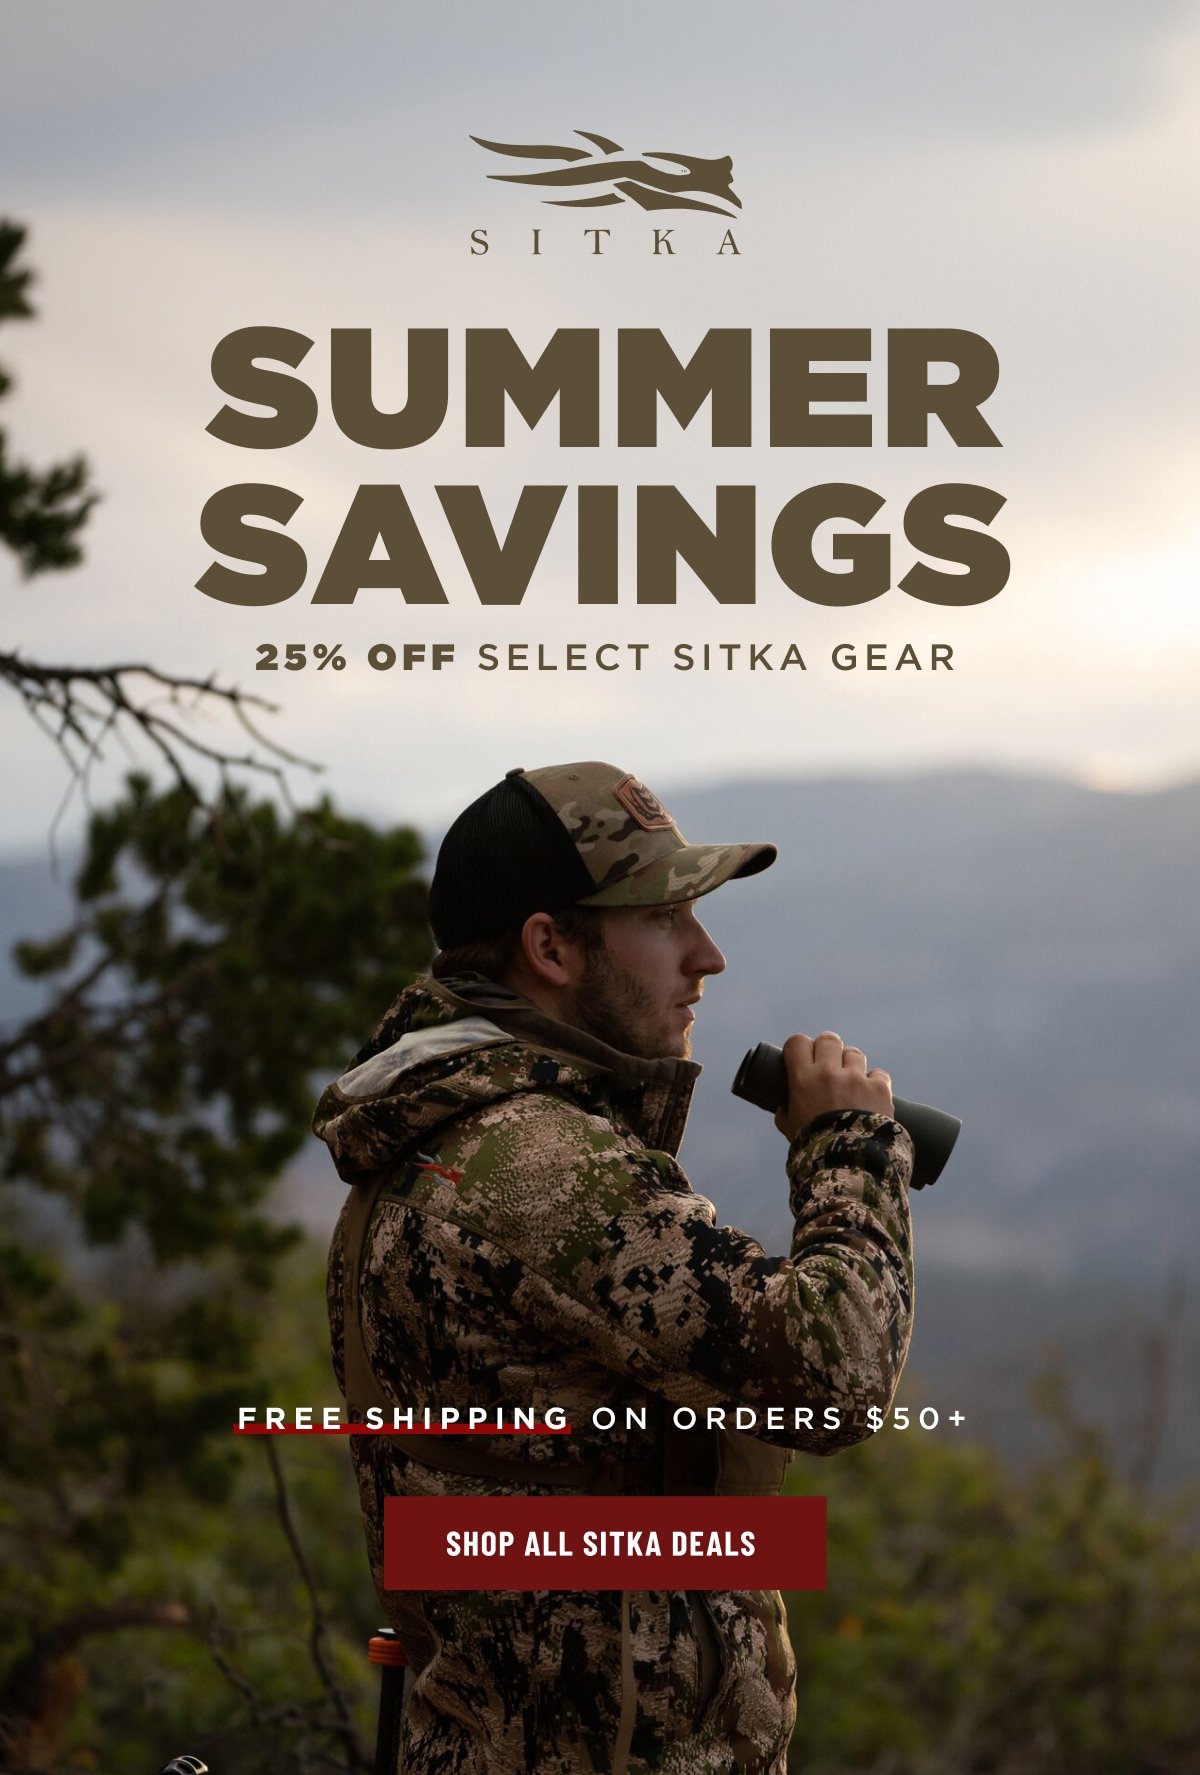 25% OFF SELECT SITKA